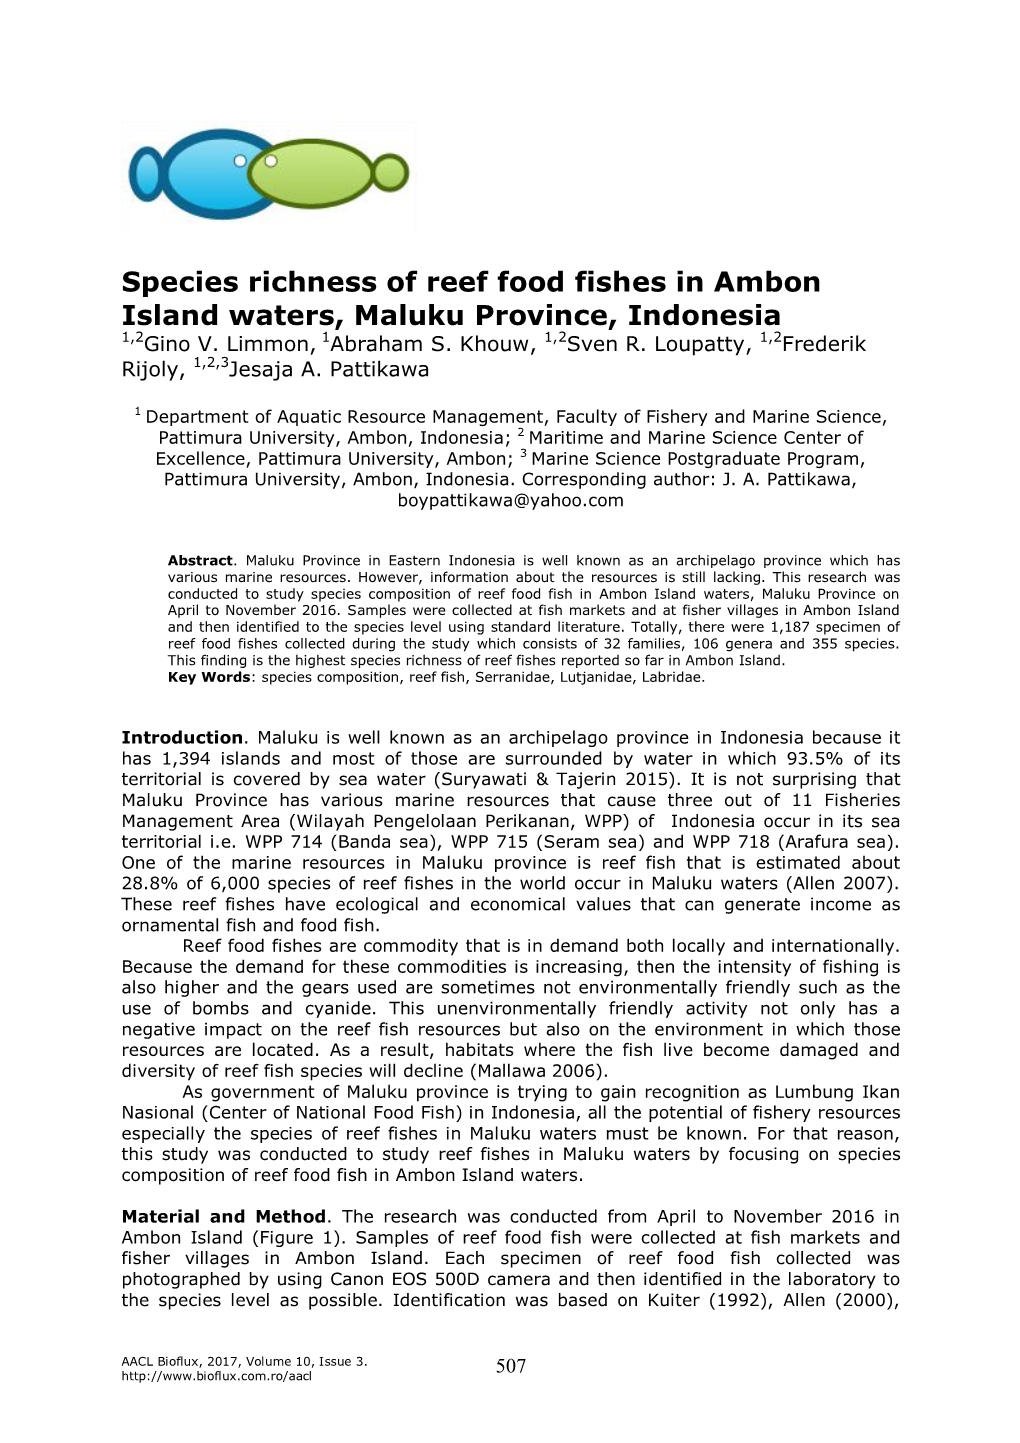 Species Richness of Reef Food Fishes in Ambon Island Waters, Maluku Province, Indonesia 1,2Gino V